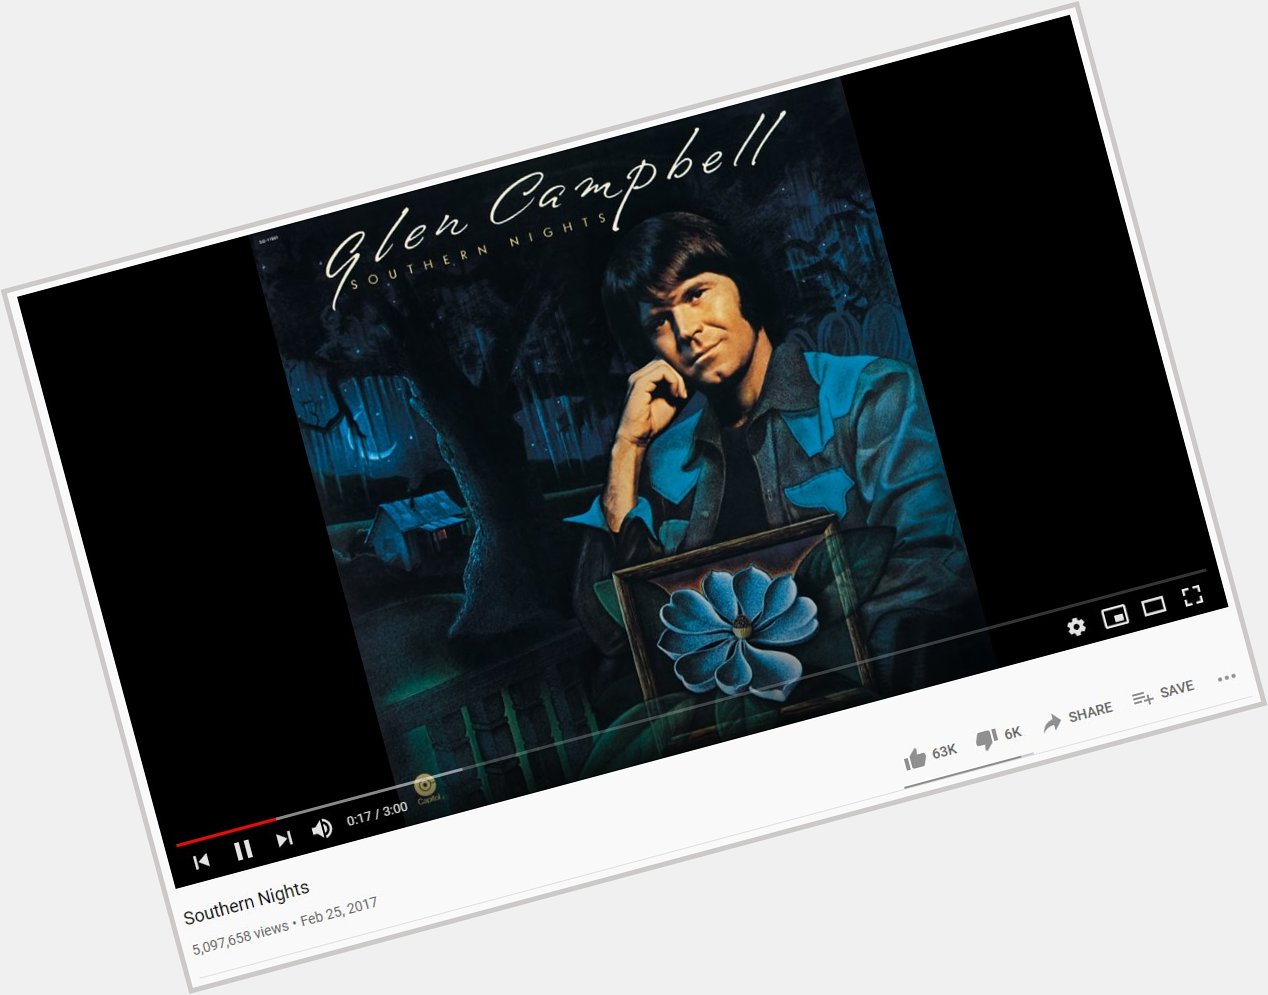 Happy birthday up in heaven Glen Campbell! Been jamming out to this all day. 